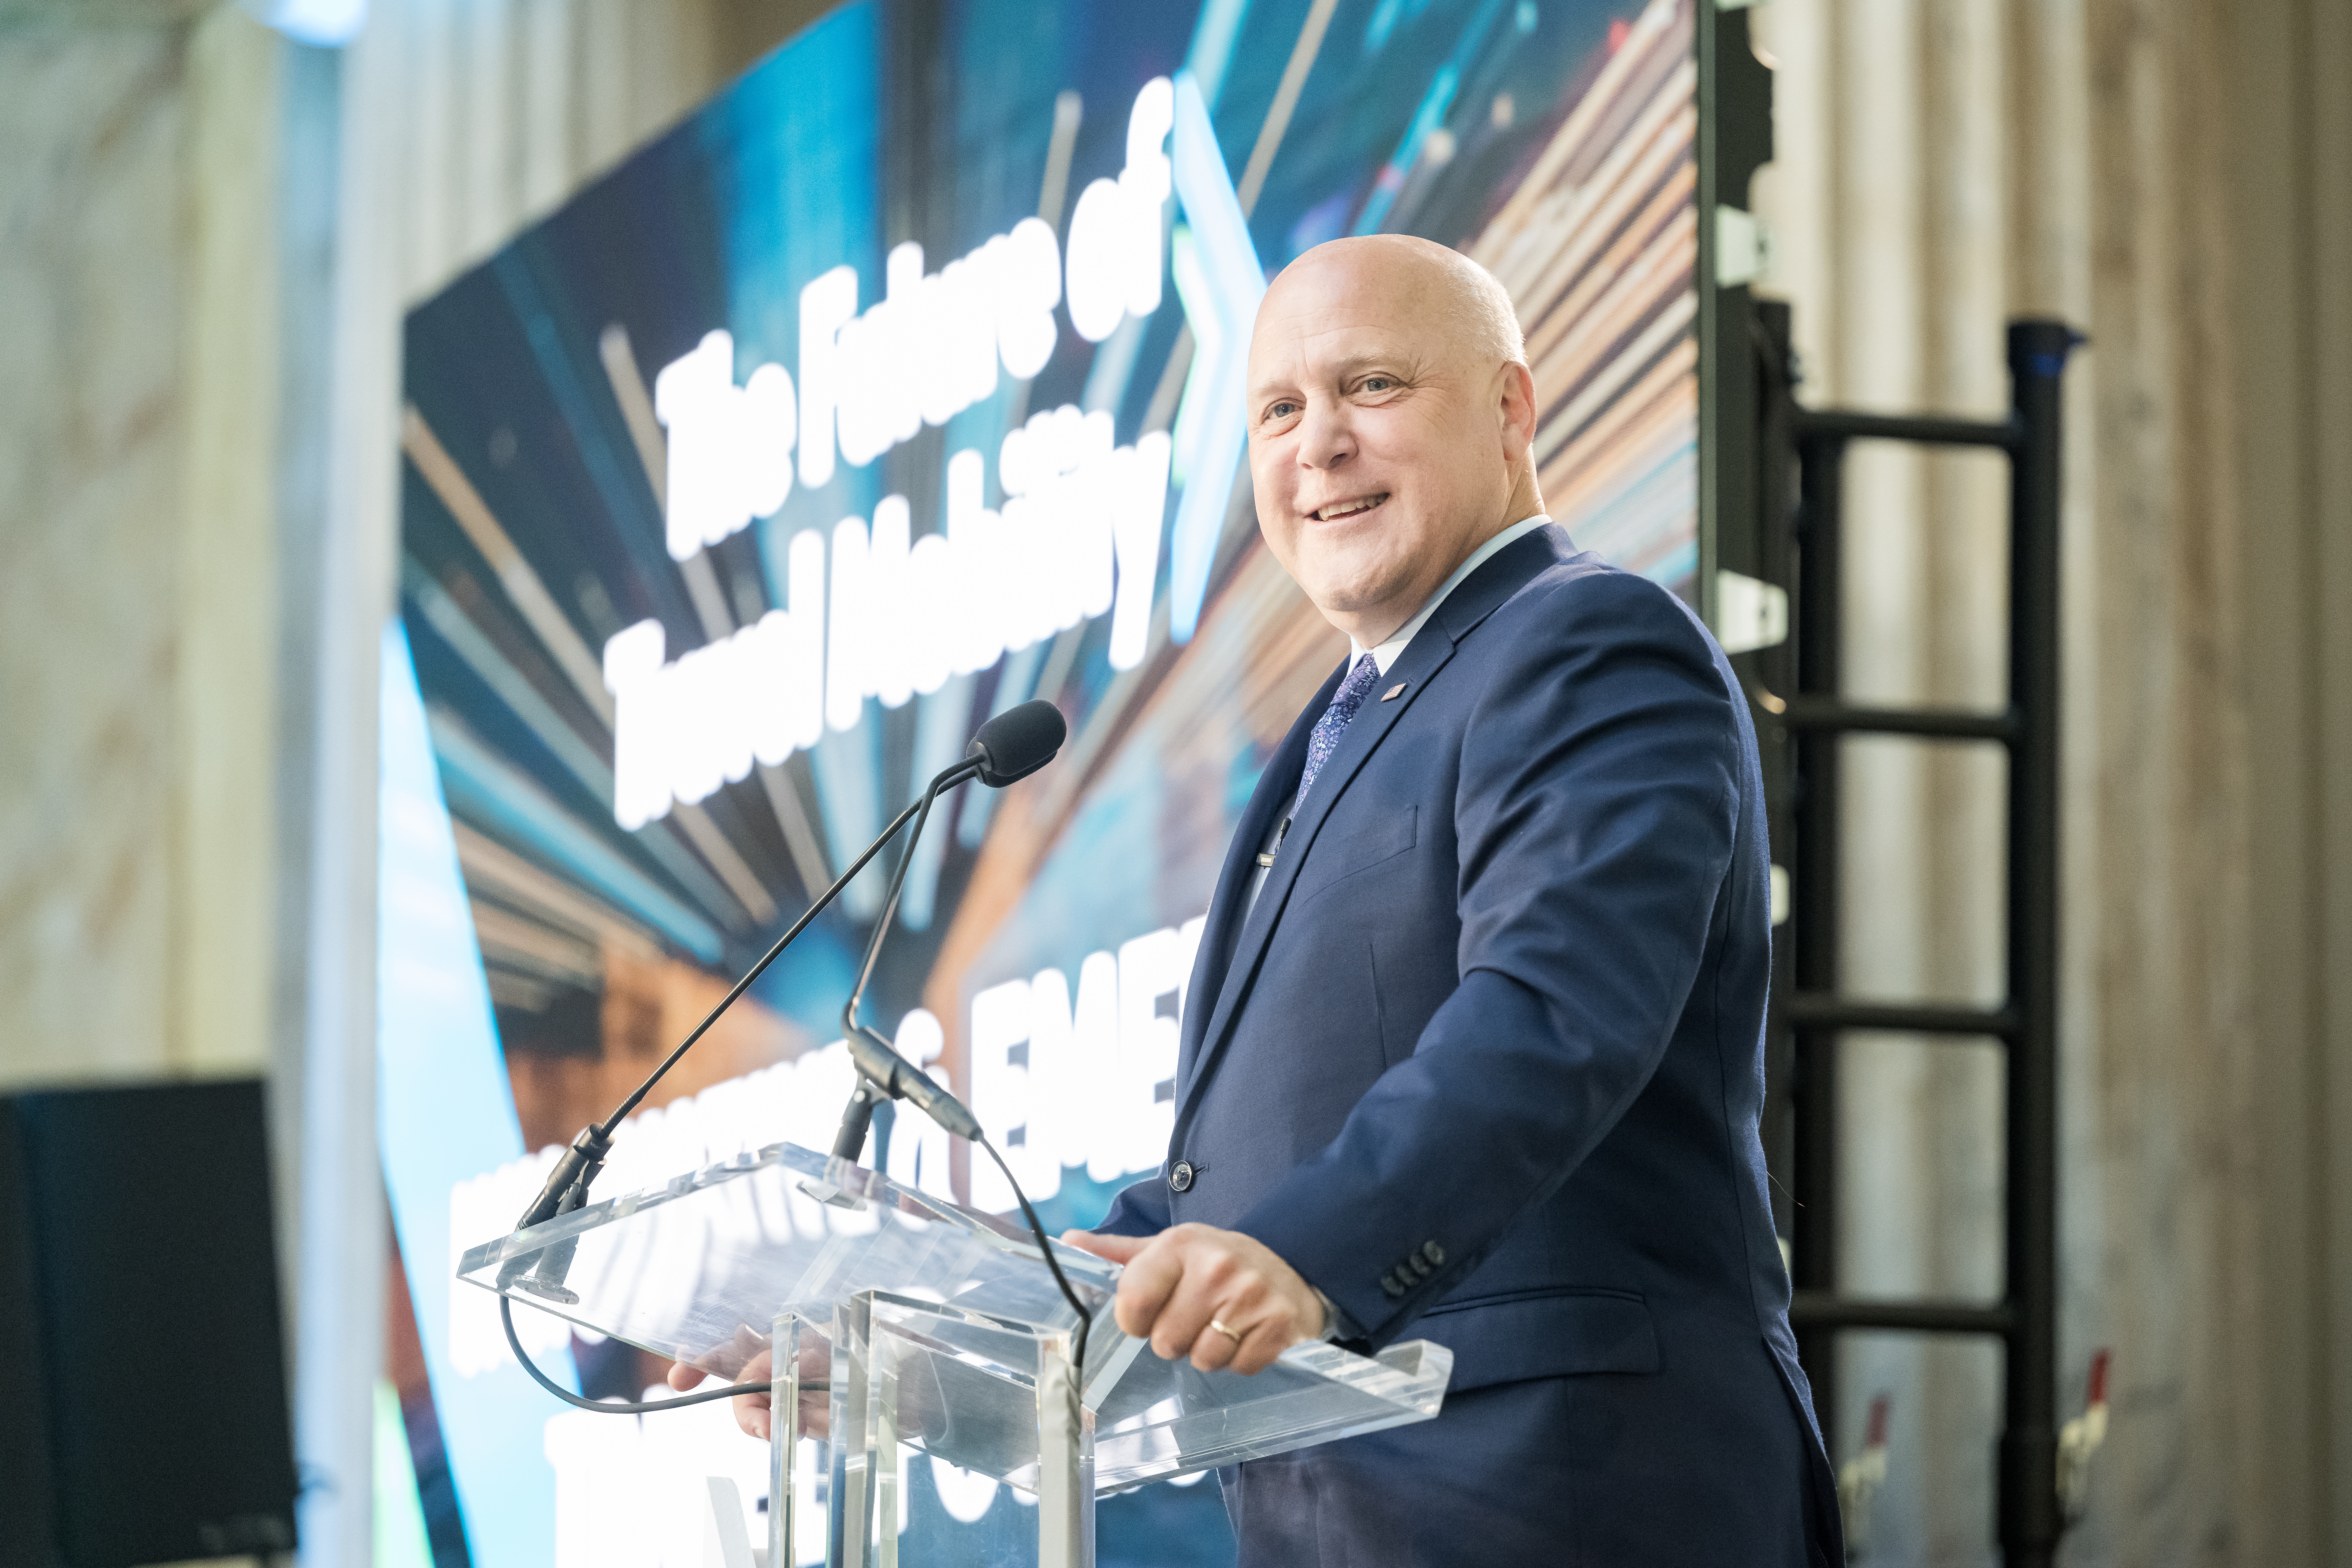 Mitch Landrieu, White House Senior Advisor & Infrastructure Implementation Coordinator, US Travel: The Future of Travel Mobility 2022 Event